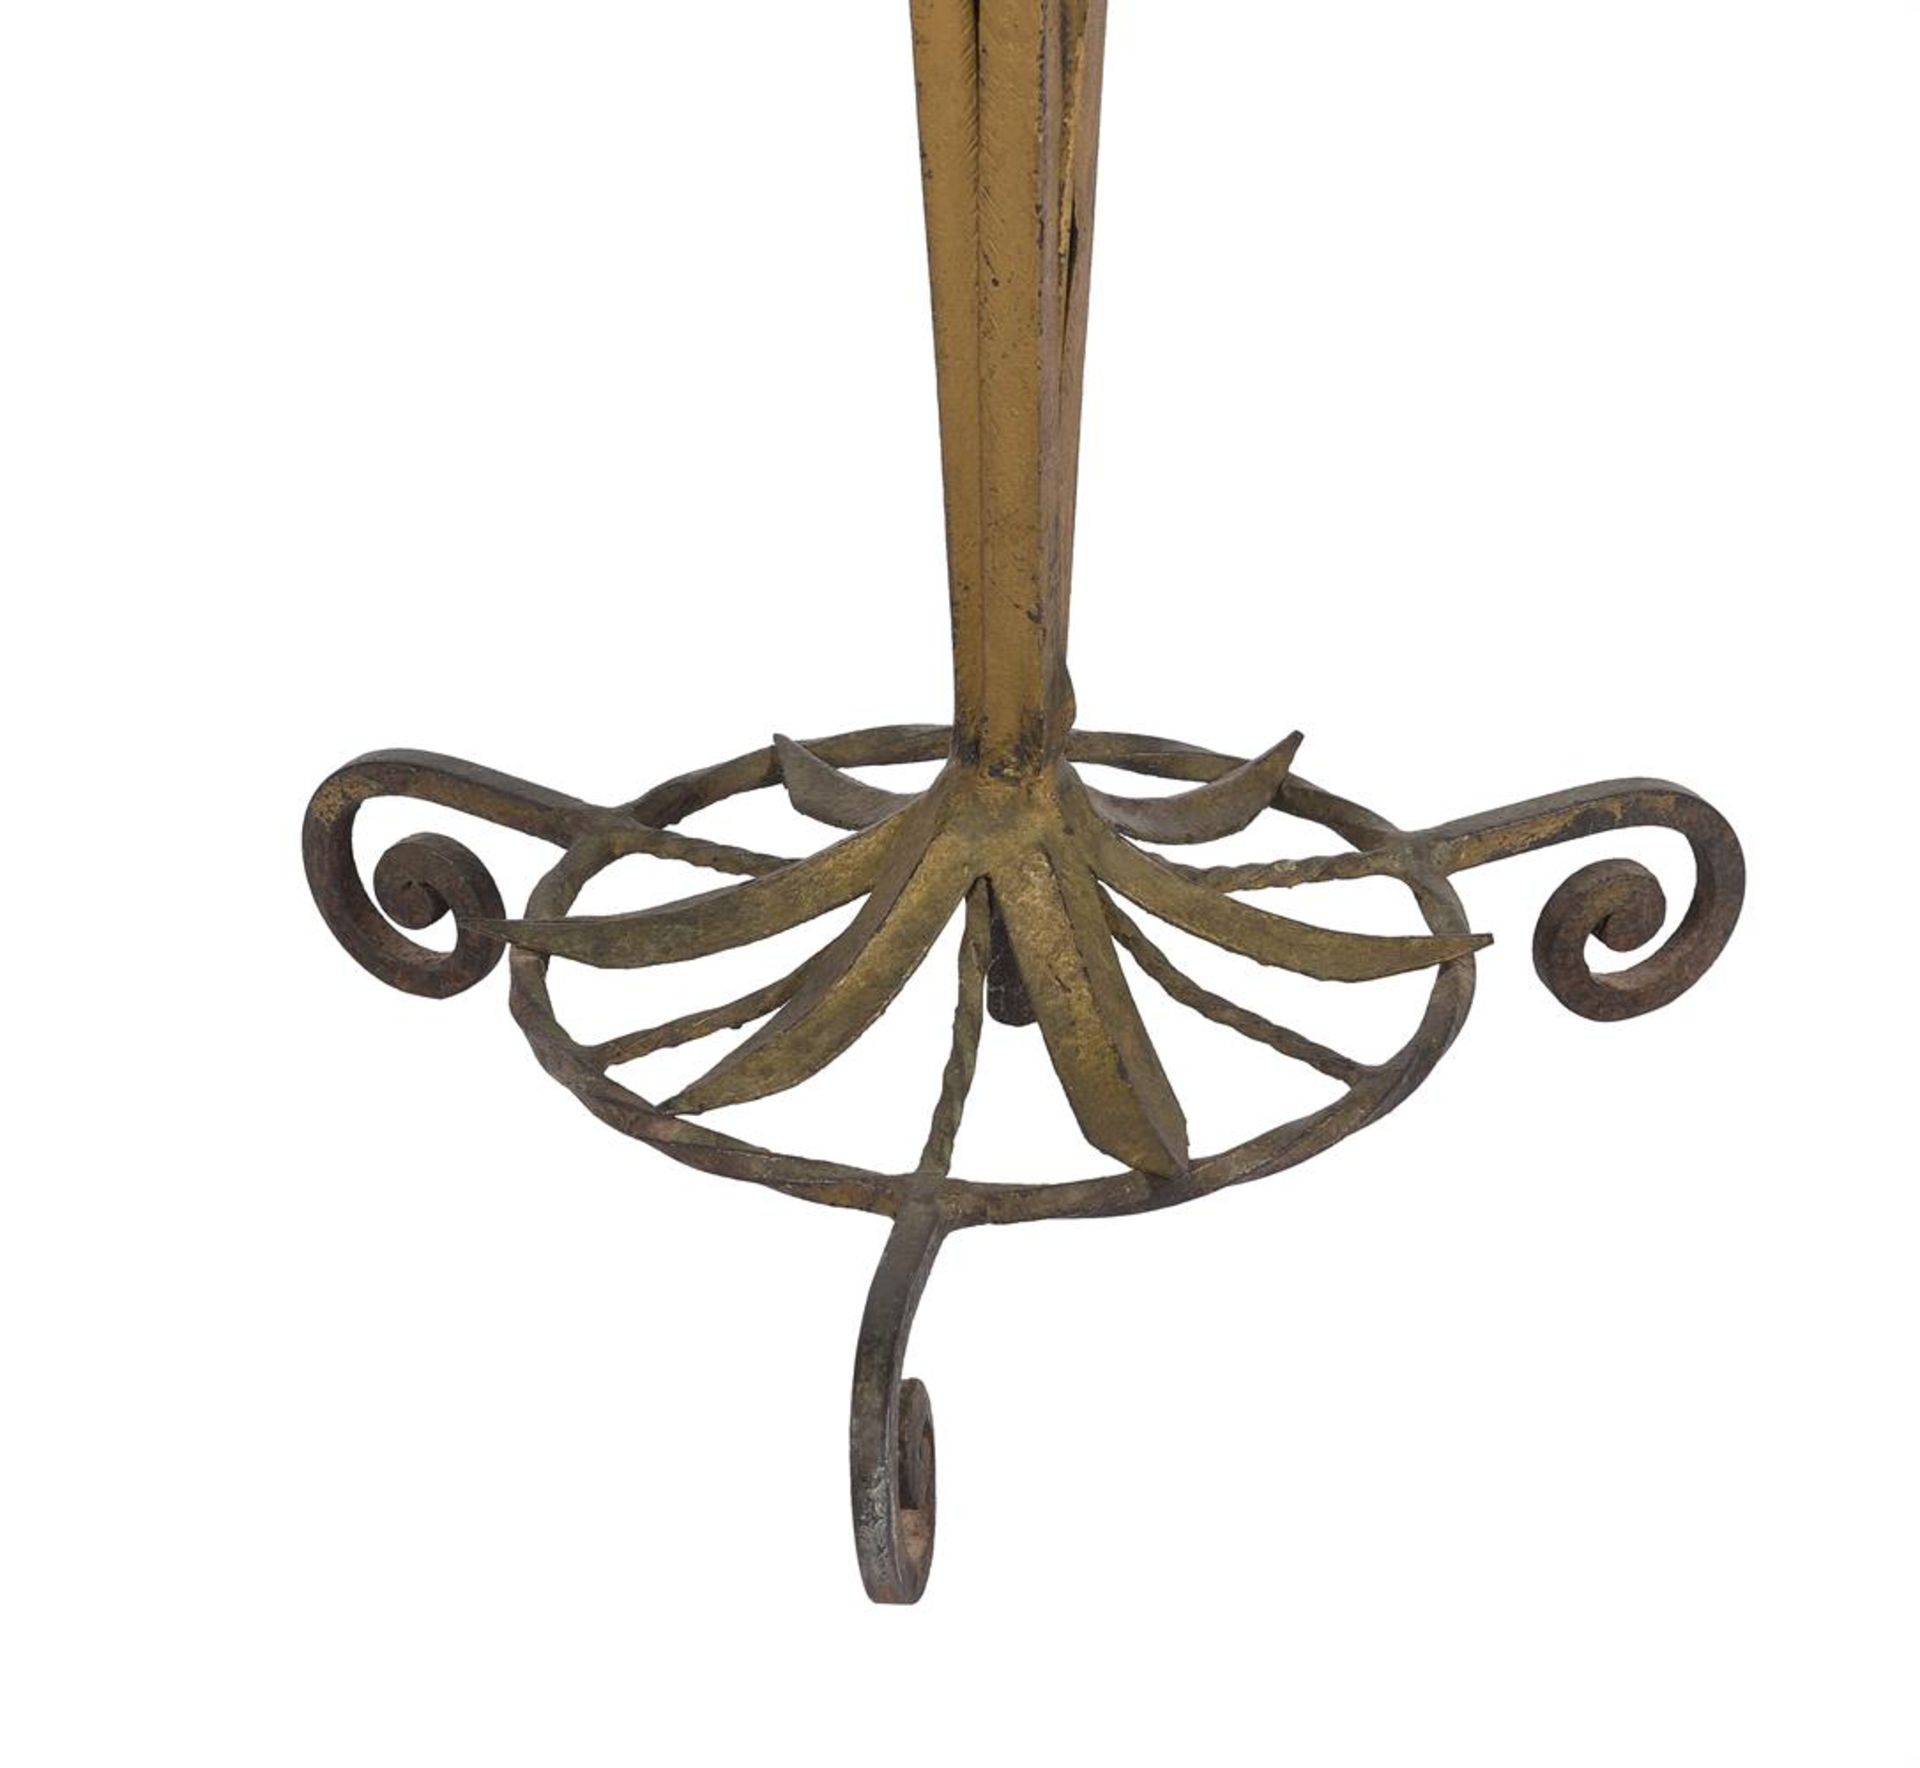 A FRENCH WROUGHT IRON AND GILT METAL FLOOR LAMP, IN THE MANNER OF MAISON BAGUES OR MAISON JANSEN - Image 3 of 3